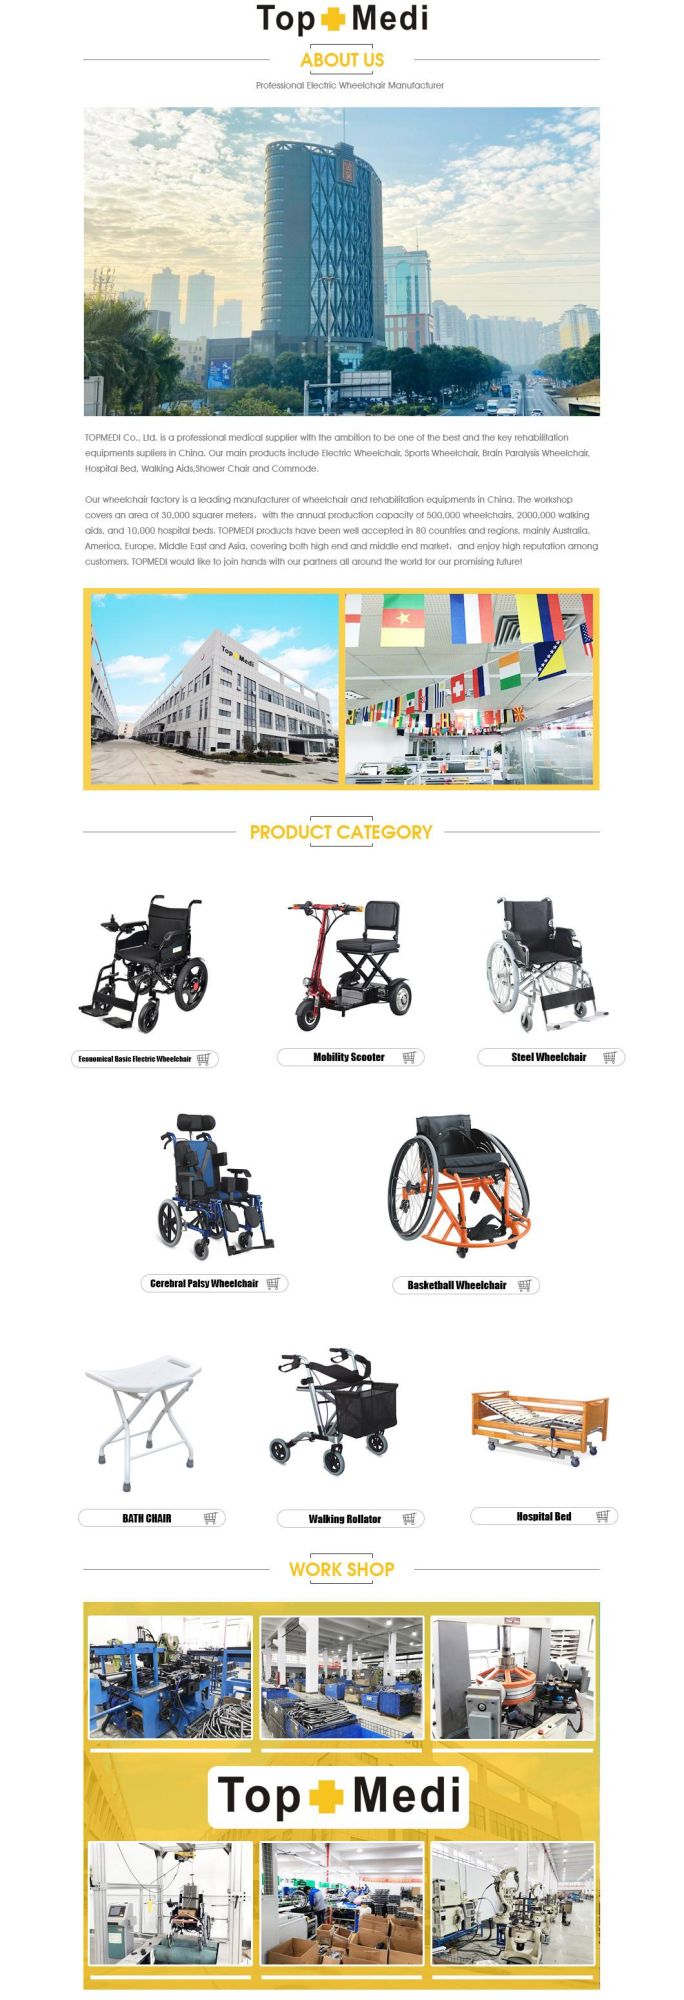 Portable Rolling Walkers Health Care Supplies Products Stand up Walking Foldable Walker Rollator